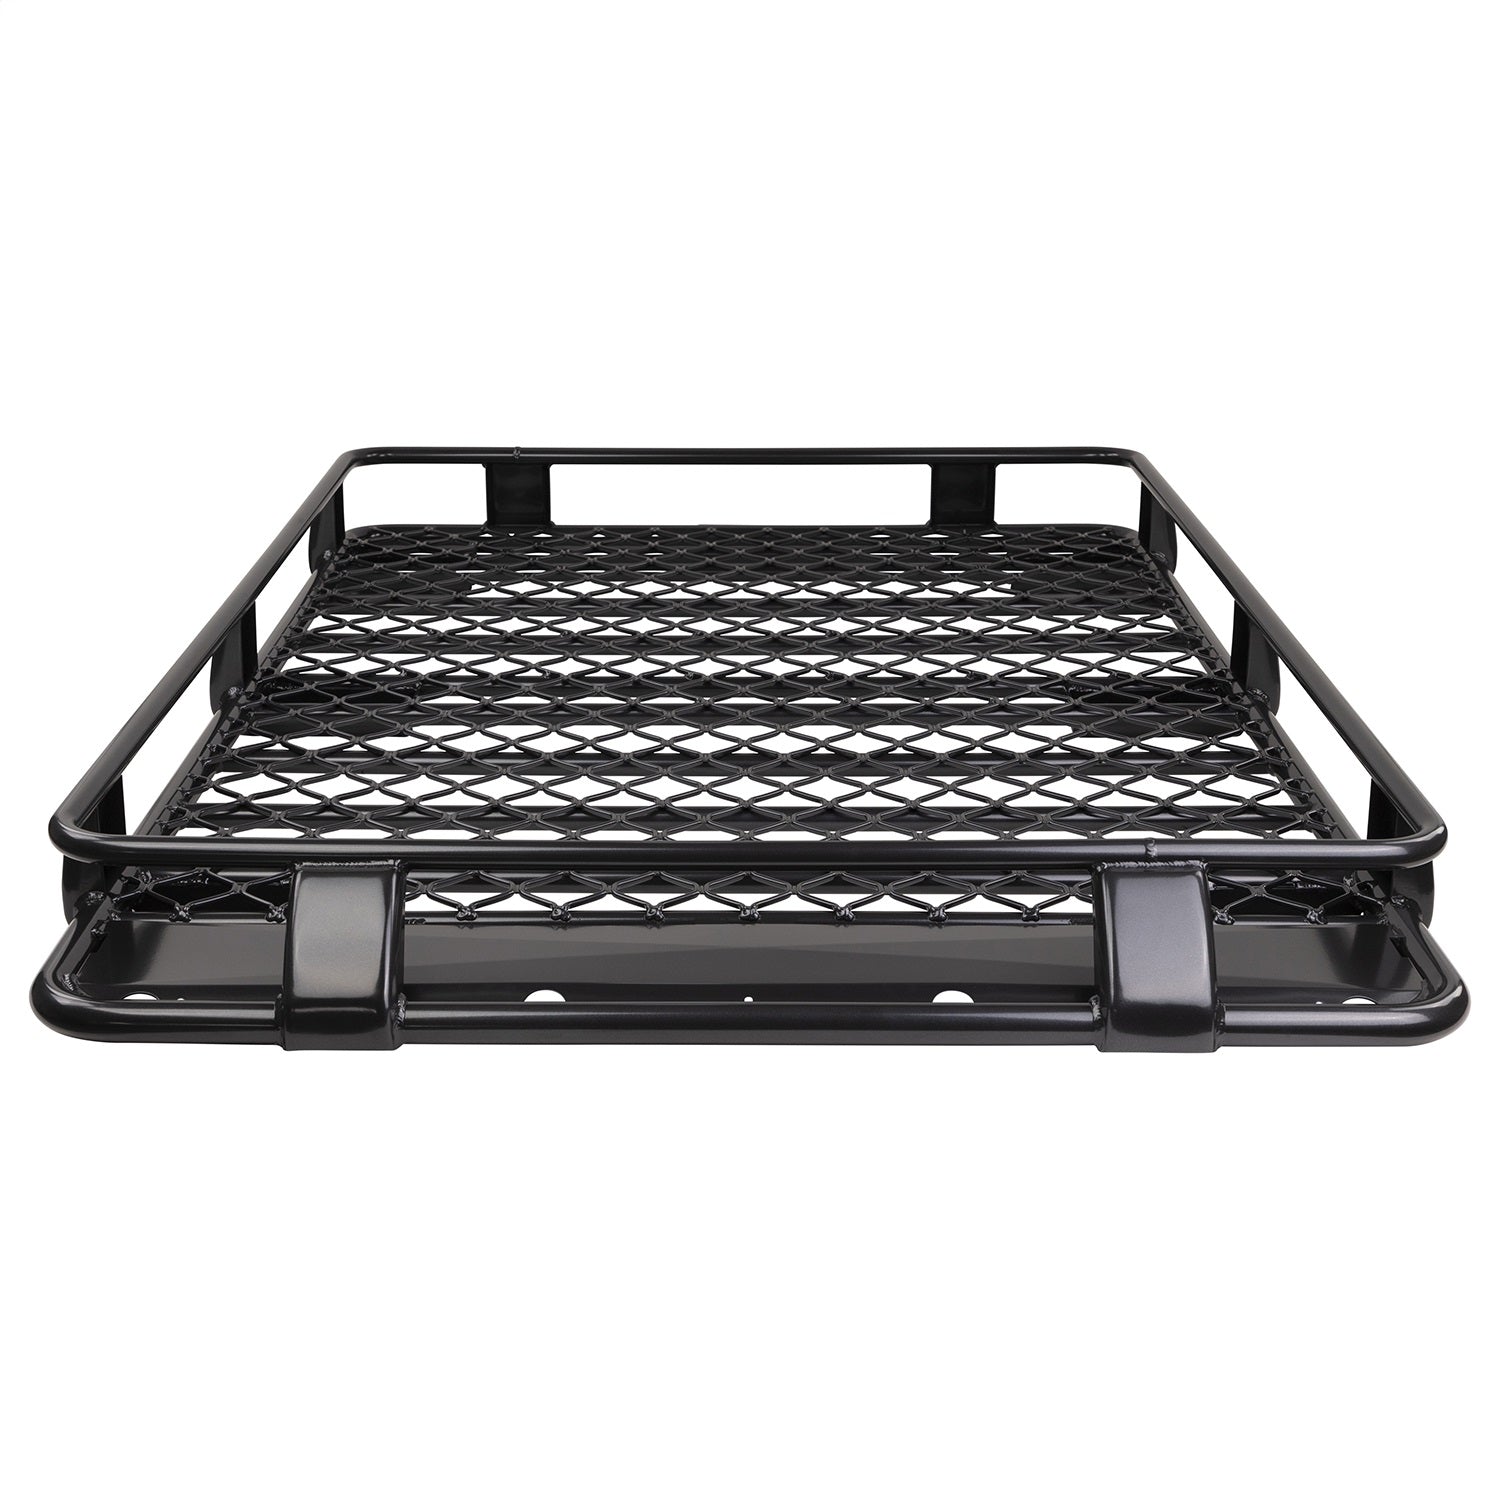 ARB 4x4 Accessories 4913010M Roof Rack Cage